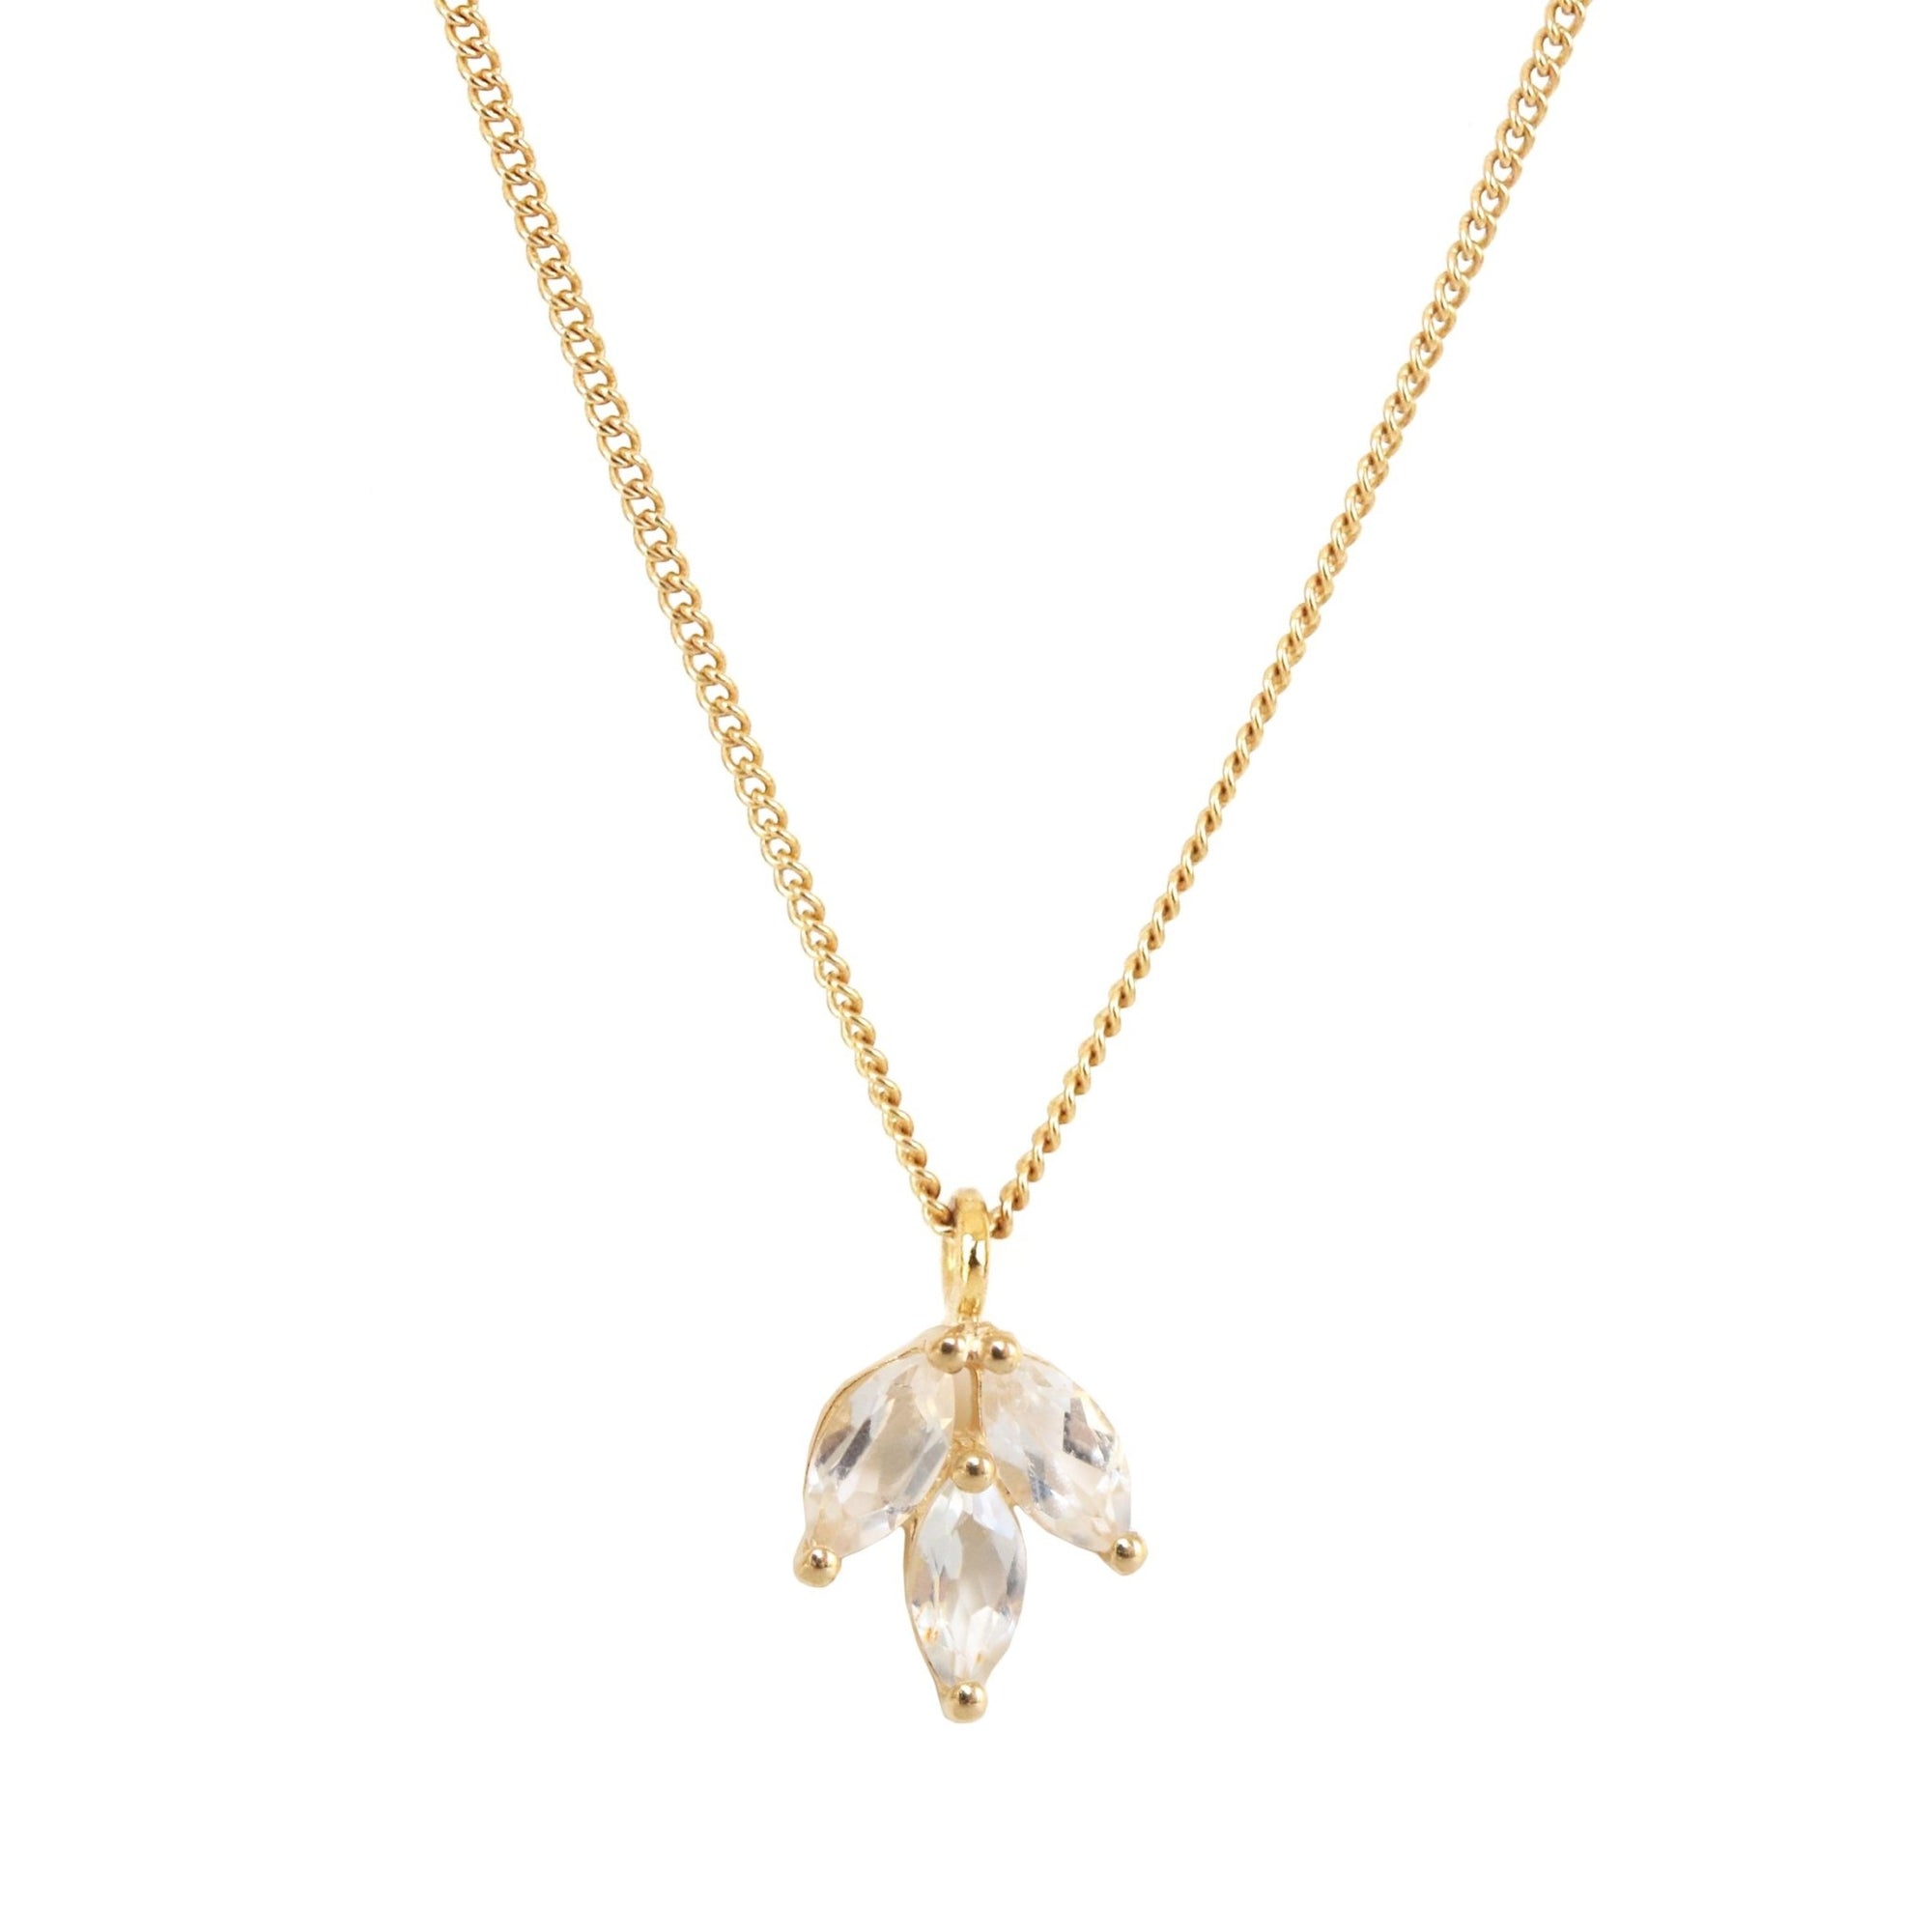 FRAICHE INSPIRE CRYSTAL OLIVE LEAF NECKLACE - WHITE TOPAZ & GOLD - SO PRETTY CARA COTTER